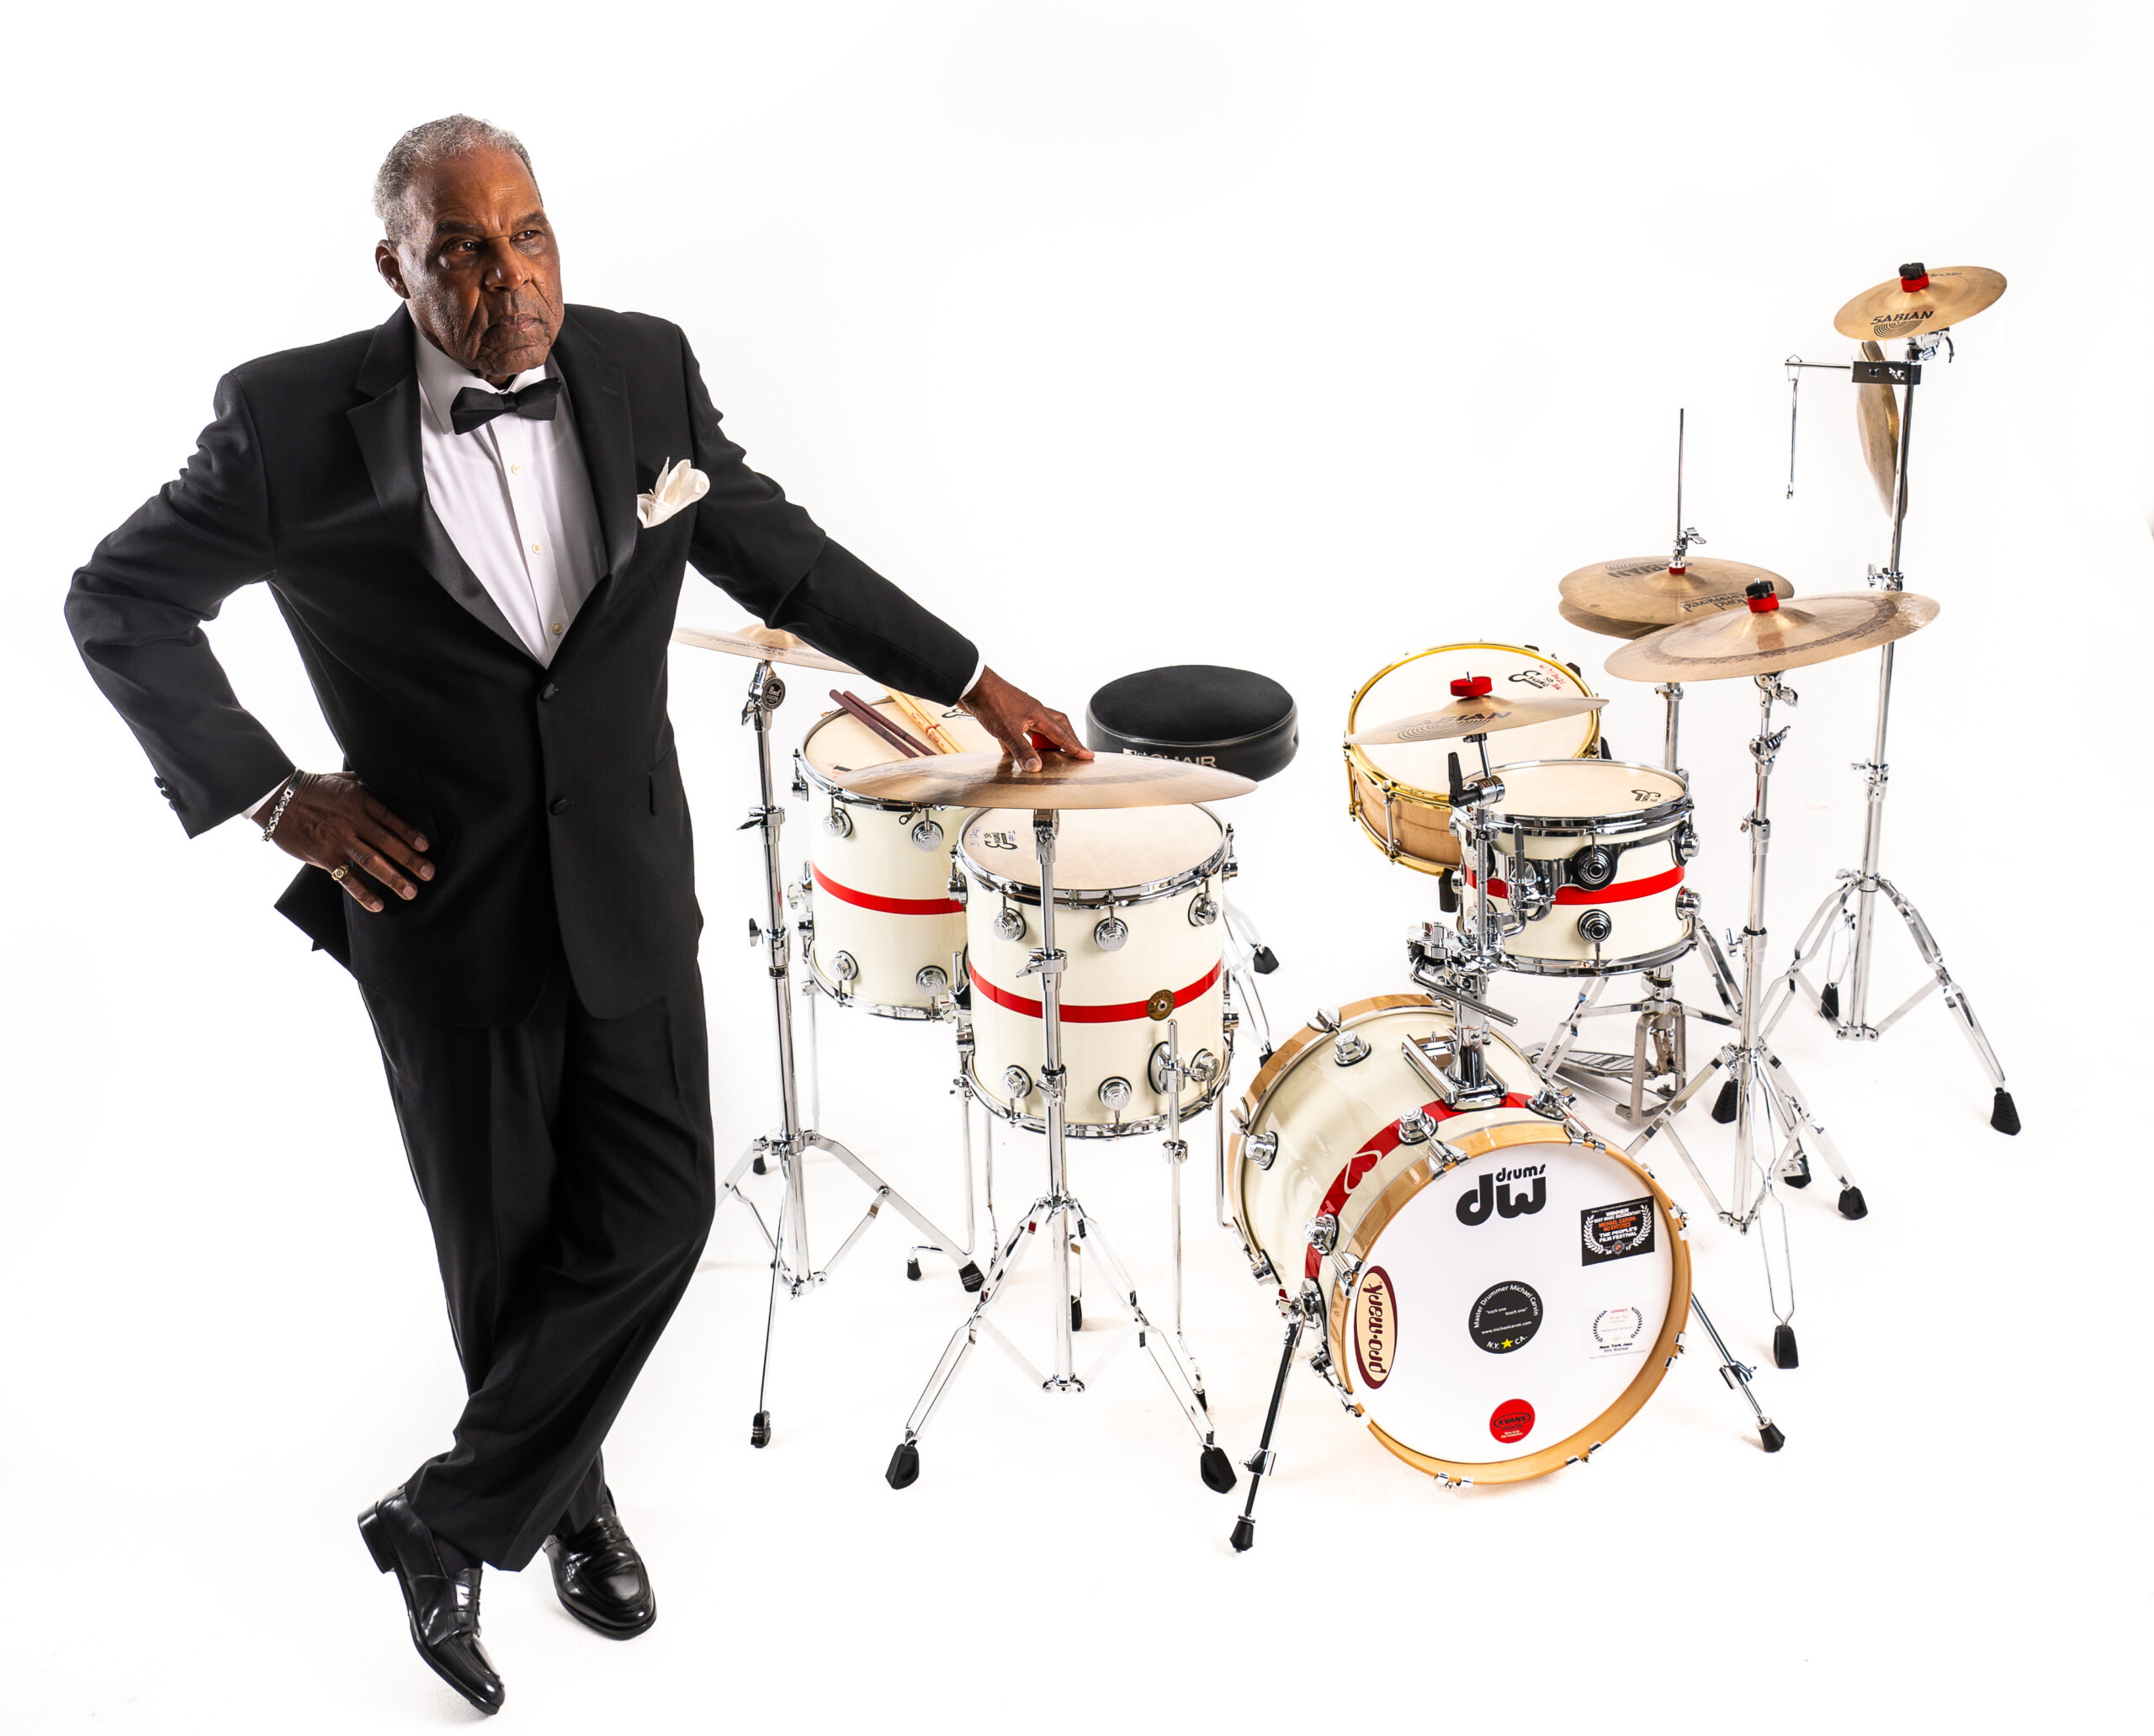 Michael Carvin in a black suit and bow tie is confidently posing next to a white and red drum set against a white background.